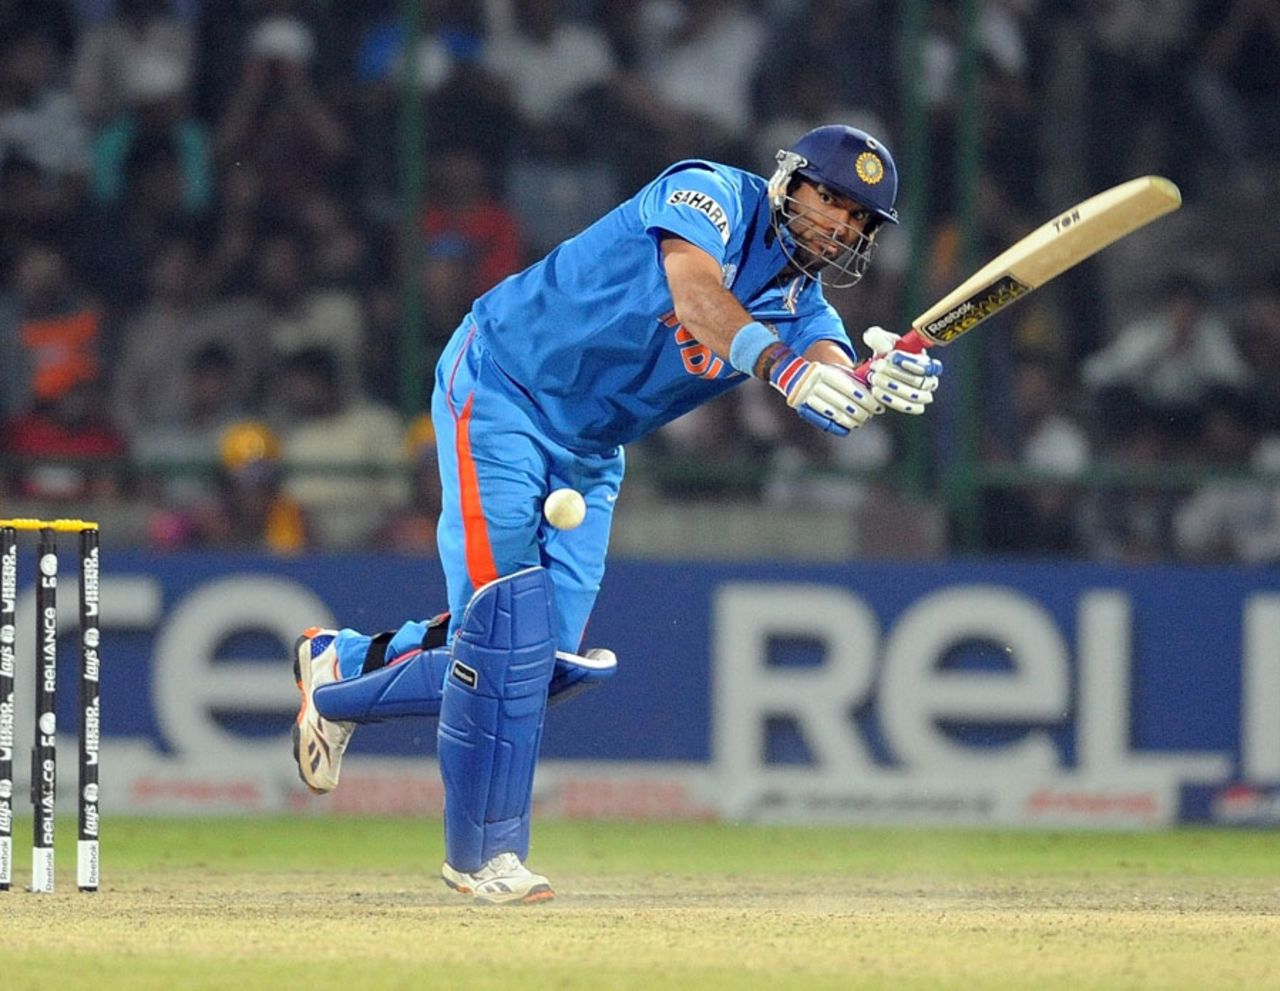 Yuvraj Singh plays one to the leg side during his half-century, India v Netherlands, Group B, World Cup, Delhi, March 9, 2011